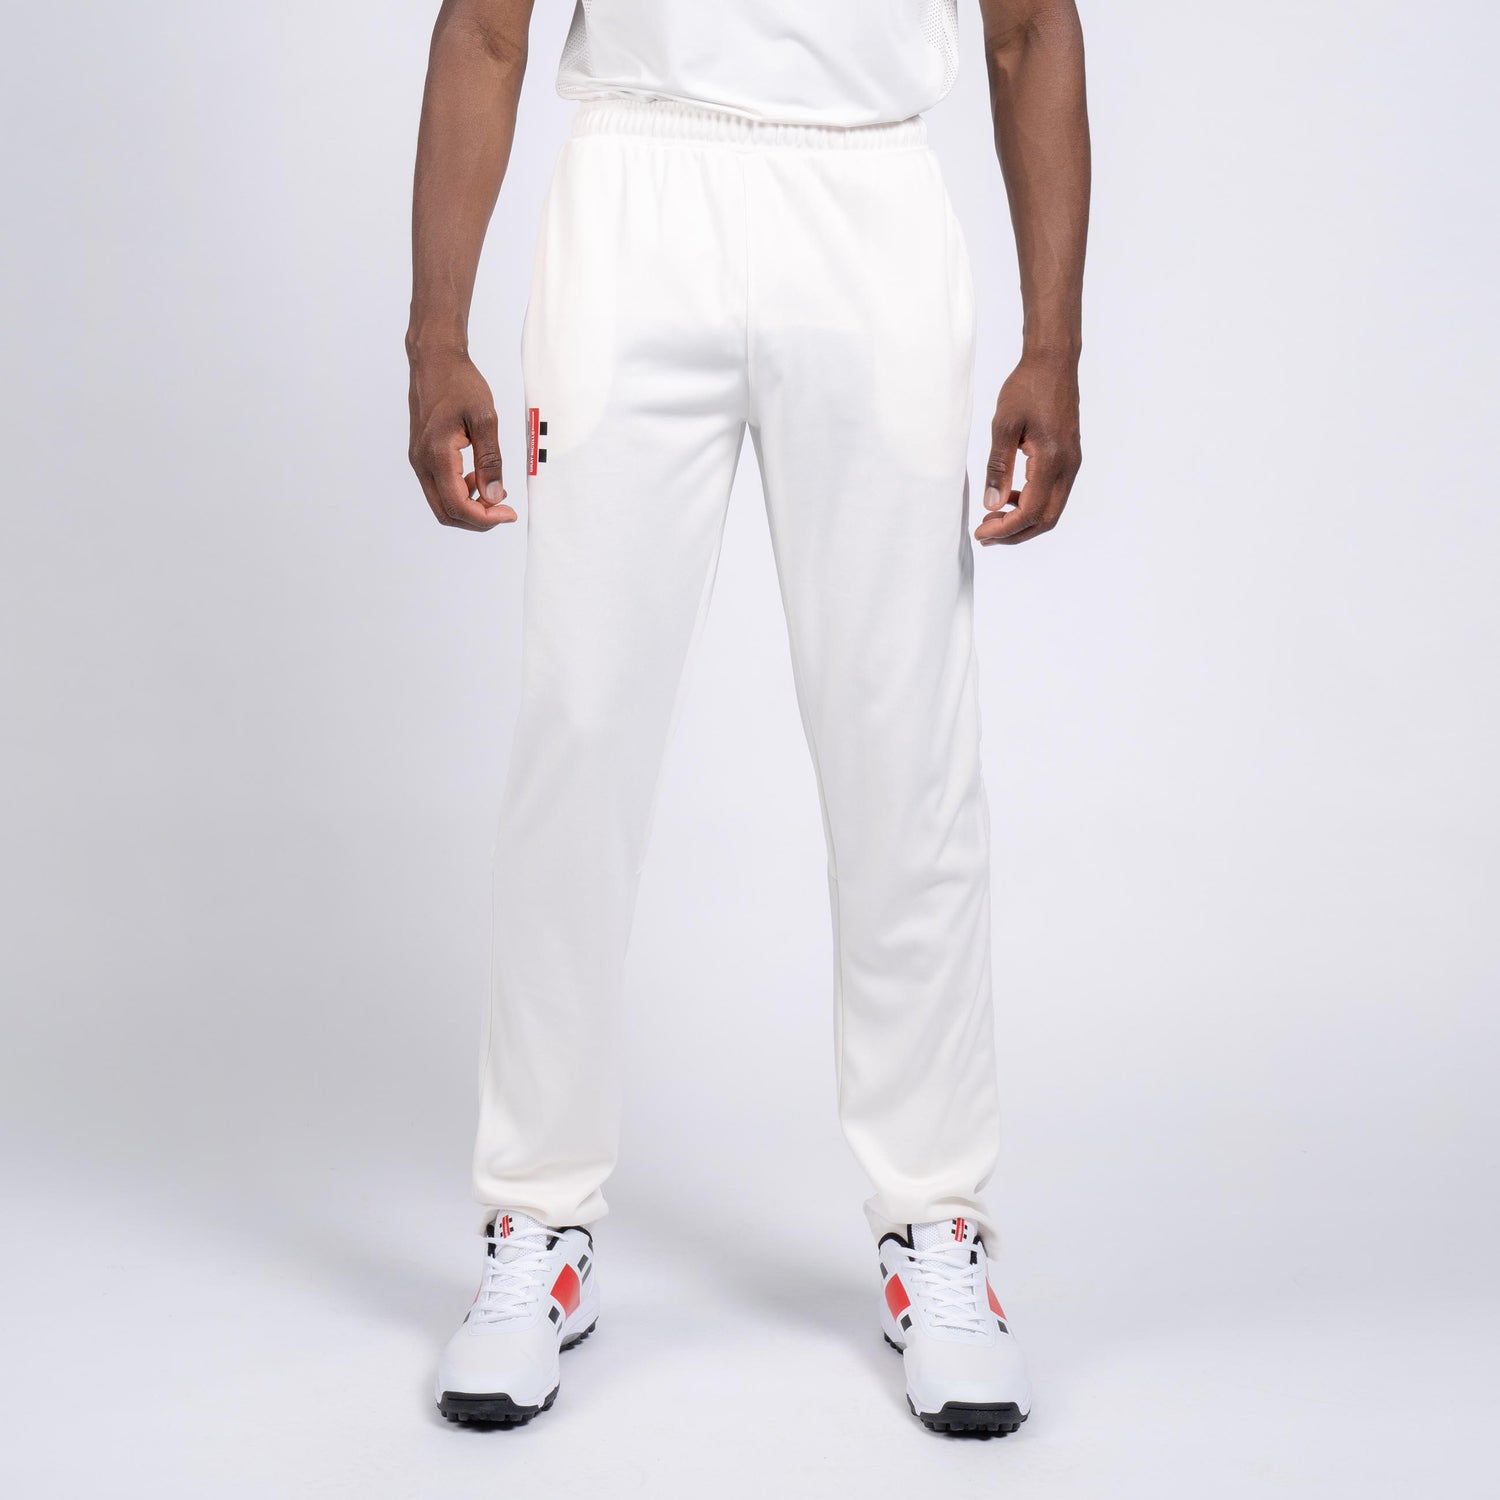 Gray Nicolls GN10 Pro Performance Off White Cricket Trouser SizeXL   Amazonin Clothing  Accessories